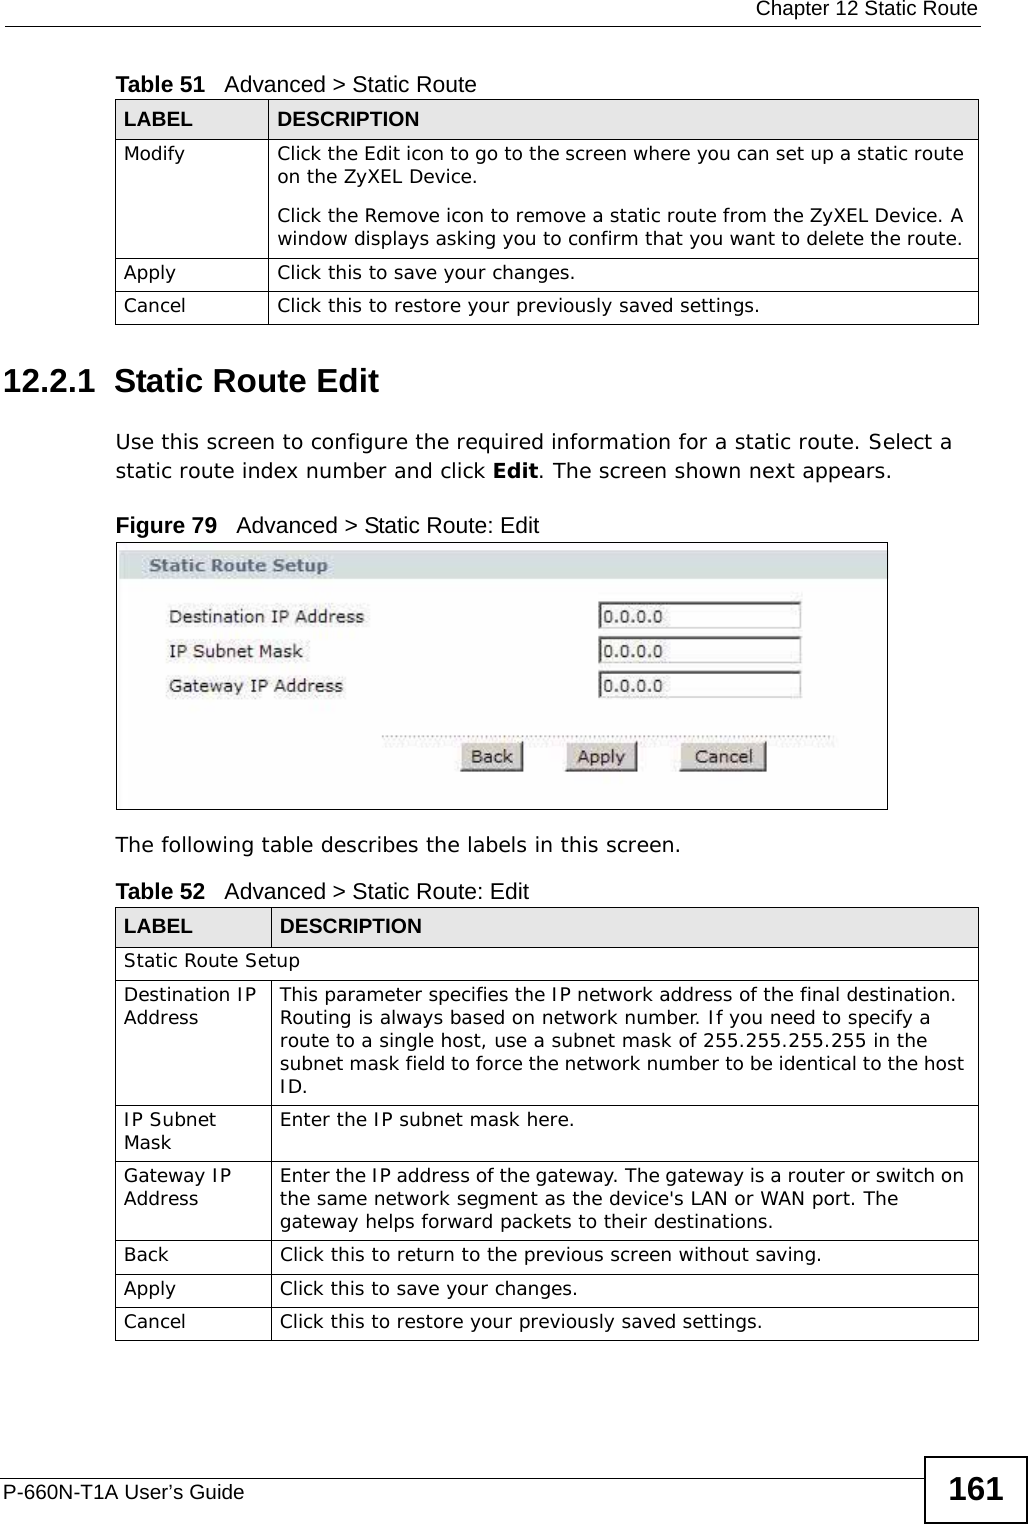  Chapter 12 Static RouteP-660N-T1A User’s Guide 16112.2.1  Static Route Edit   Use this screen to configure the required information for a static route. Select a static route index number and click Edit. The screen shown next appears.Figure 79   Advanced &gt; Static Route: EditThe following table describes the labels in this screen. Modify Click the Edit icon to go to the screen where you can set up a static route on the ZyXEL Device.Click the Remove icon to remove a static route from the ZyXEL Device. A window displays asking you to confirm that you want to delete the route. Apply Click this to save your changes.Cancel Click this to restore your previously saved settings.Table 51   Advanced &gt; Static RouteLABEL DESCRIPTIONTable 52   Advanced &gt; Static Route: EditLABEL DESCRIPTIONStatic Route SetupDestination IP Address This parameter specifies the IP network address of the final destination.  Routing is always based on network number. If you need to specify a route to a single host, use a subnet mask of 255.255.255.255 in the subnet mask field to force the network number to be identical to the host ID.IP Subnet Mask  Enter the IP subnet mask here.Gateway IP Address Enter the IP address of the gateway. The gateway is a router or switch on the same network segment as the device&apos;s LAN or WAN port. The gateway helps forward packets to their destinations.Back Click this to return to the previous screen without saving.Apply Click this to save your changes.Cancel Click this to restore your previously saved settings.